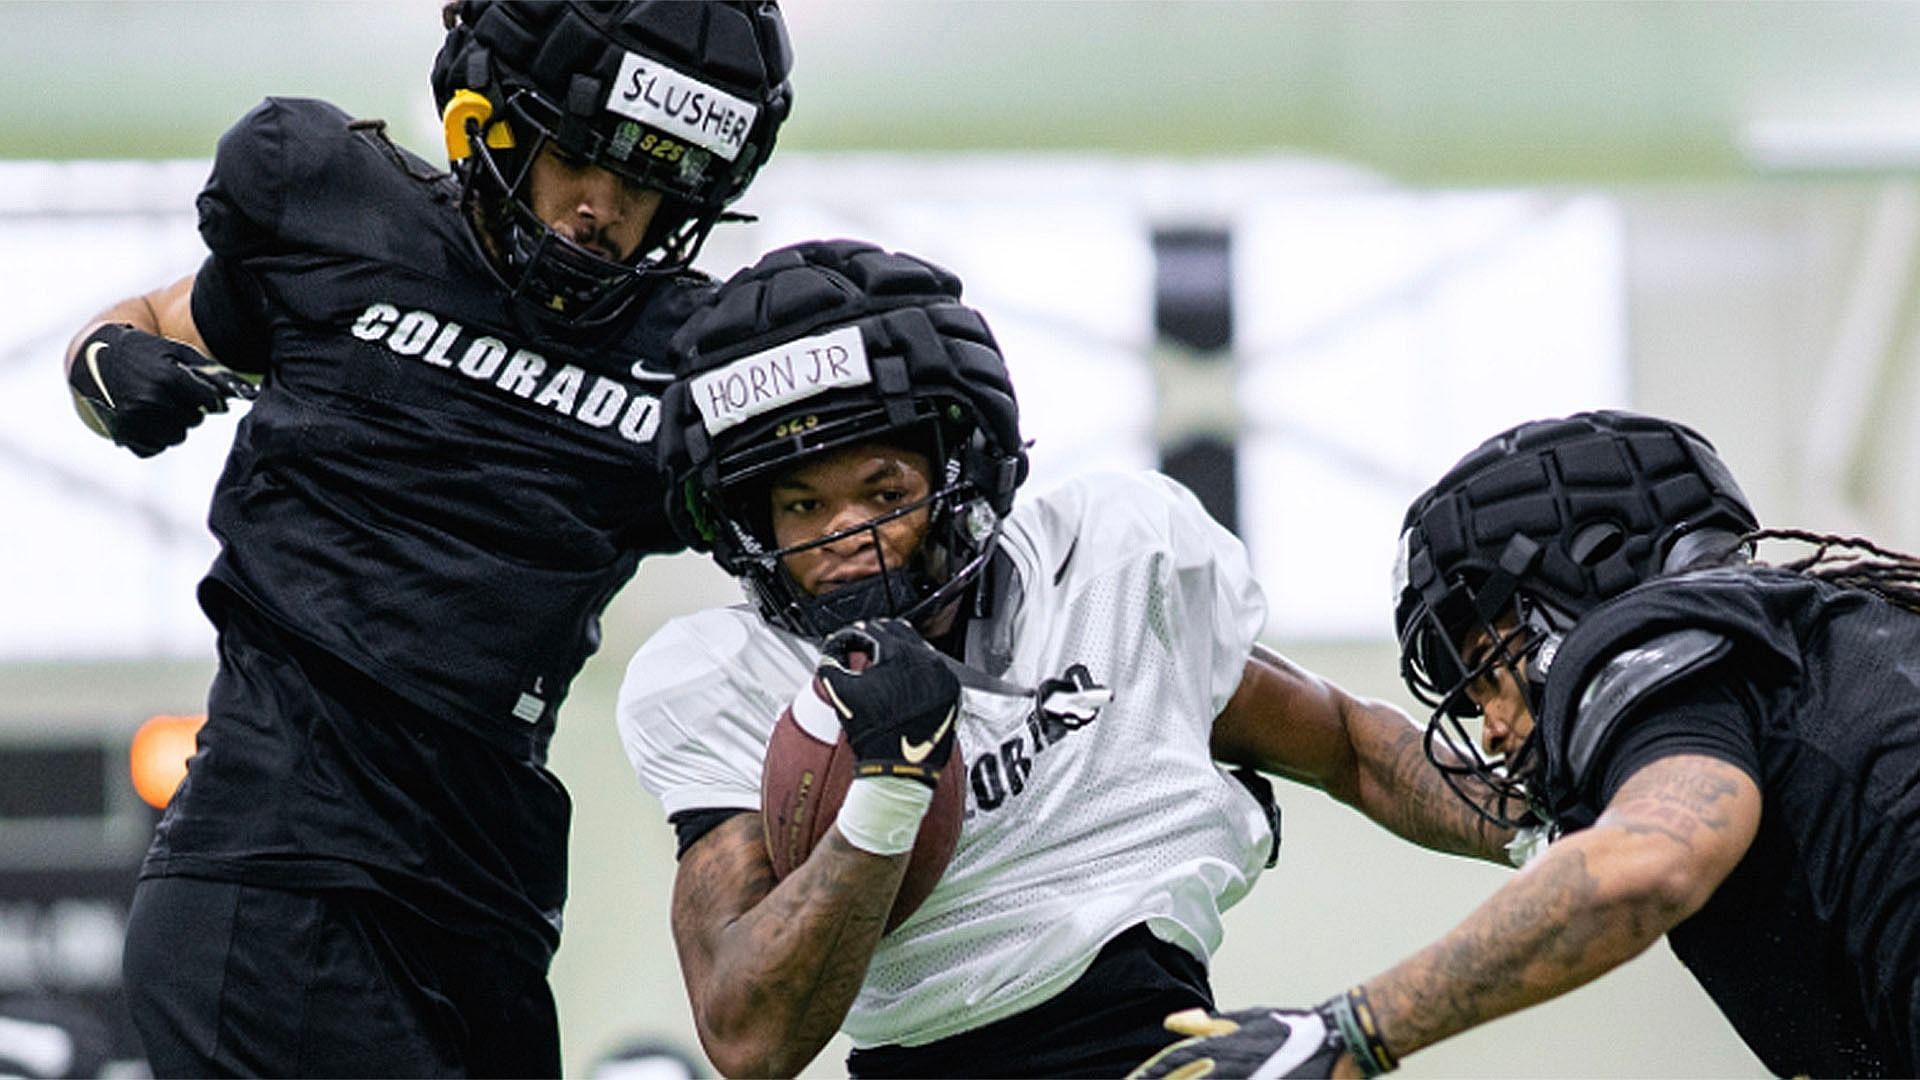 Colorado Buffaloes wideout Jimmy Horn Jr. in practice 